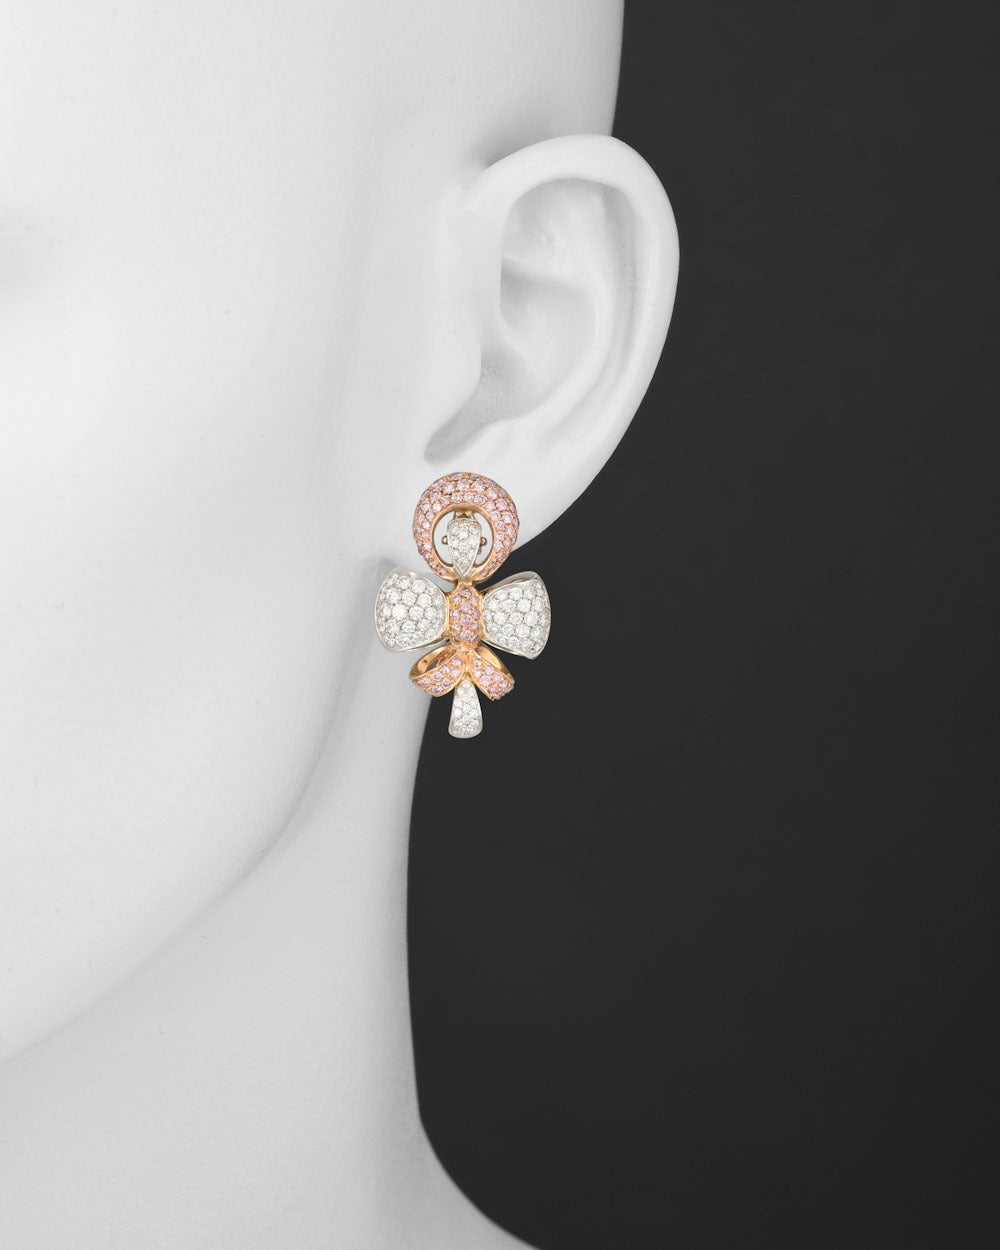 Pink and white diamond earclips, in an unusual double bow motif design showcasing a delicate balance of pink diamonds set in 18k pink gold and white diamonds set in 18k white gold, the pink diamonds weighing approximately 3.85 total carats and white